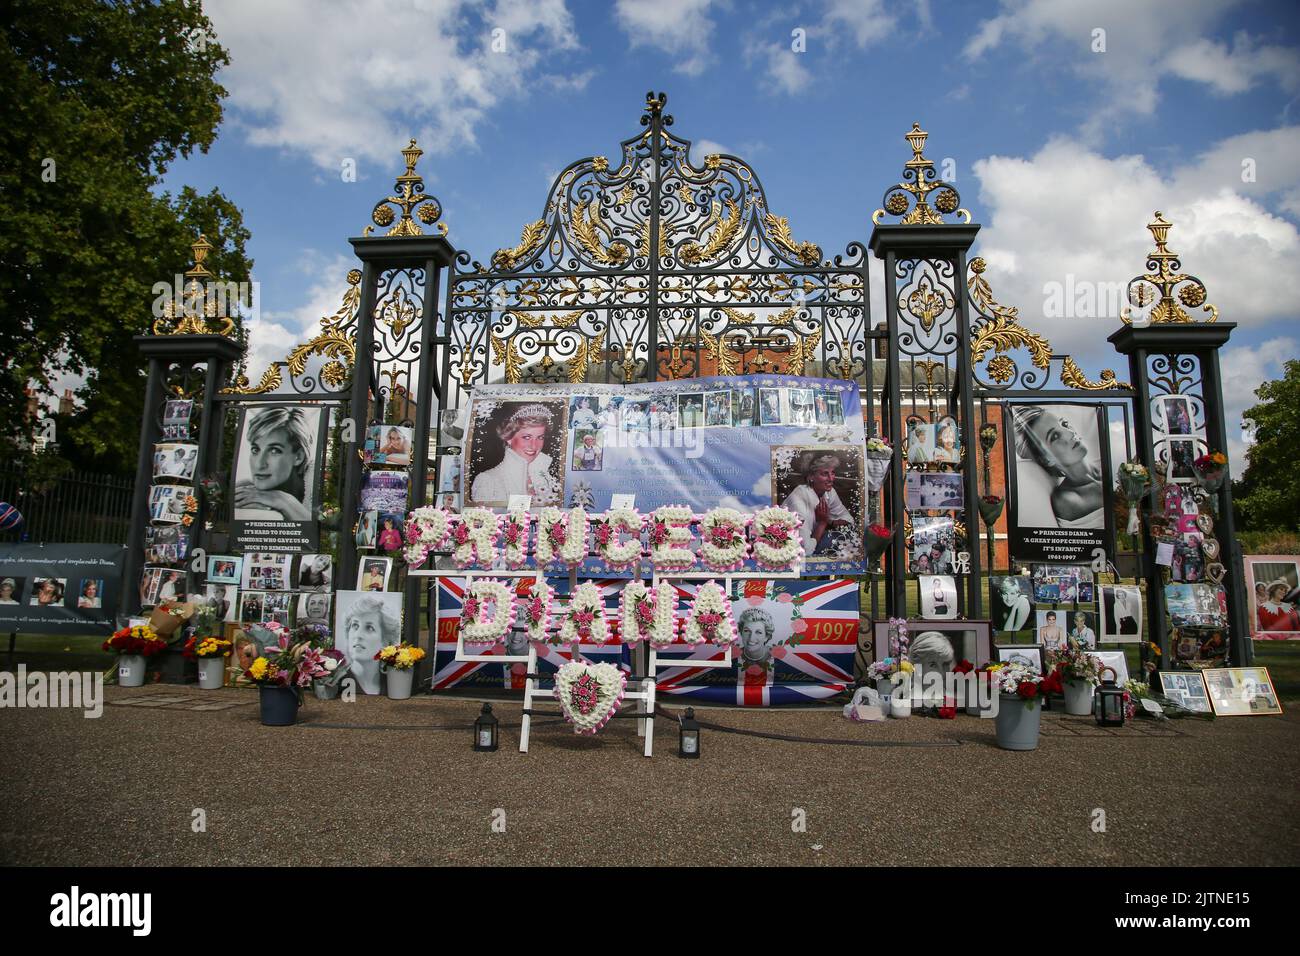 London, UK. 31st Aug, 2022. Tributes at the gates of Kensington Palace in London on the 25th death anniversary of Diana, Princess of Wales, who died at Pitie-Salpetriere Hospital in the early hours of 31 August 1997 following a fatal car crash in Pont de l'Alma tunnel. (Photo by Steve Taylor/SOPA Images/Sipa USA) Credit: Sipa USA/Alamy Live News Stock Photo